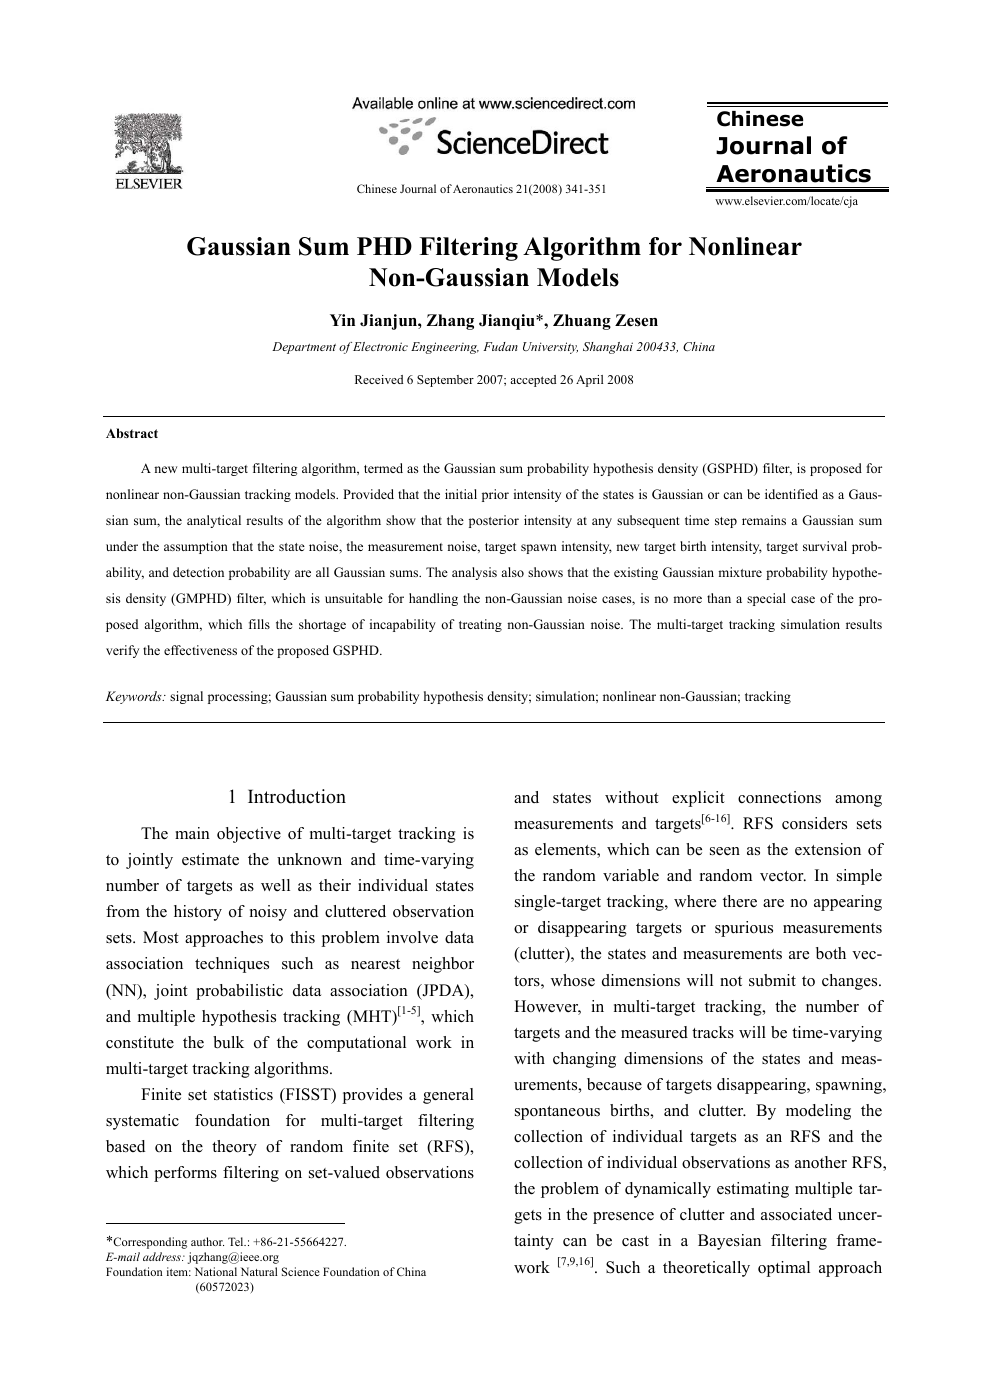 Gaussian Sum Phd Filtering Algorithm For Nonlinear Non Gaussian Models Topic Of Research Paper In Physical Sciences Download Scholarly Article Pdf And Read For Free On Cyberleninka Open Science Hub